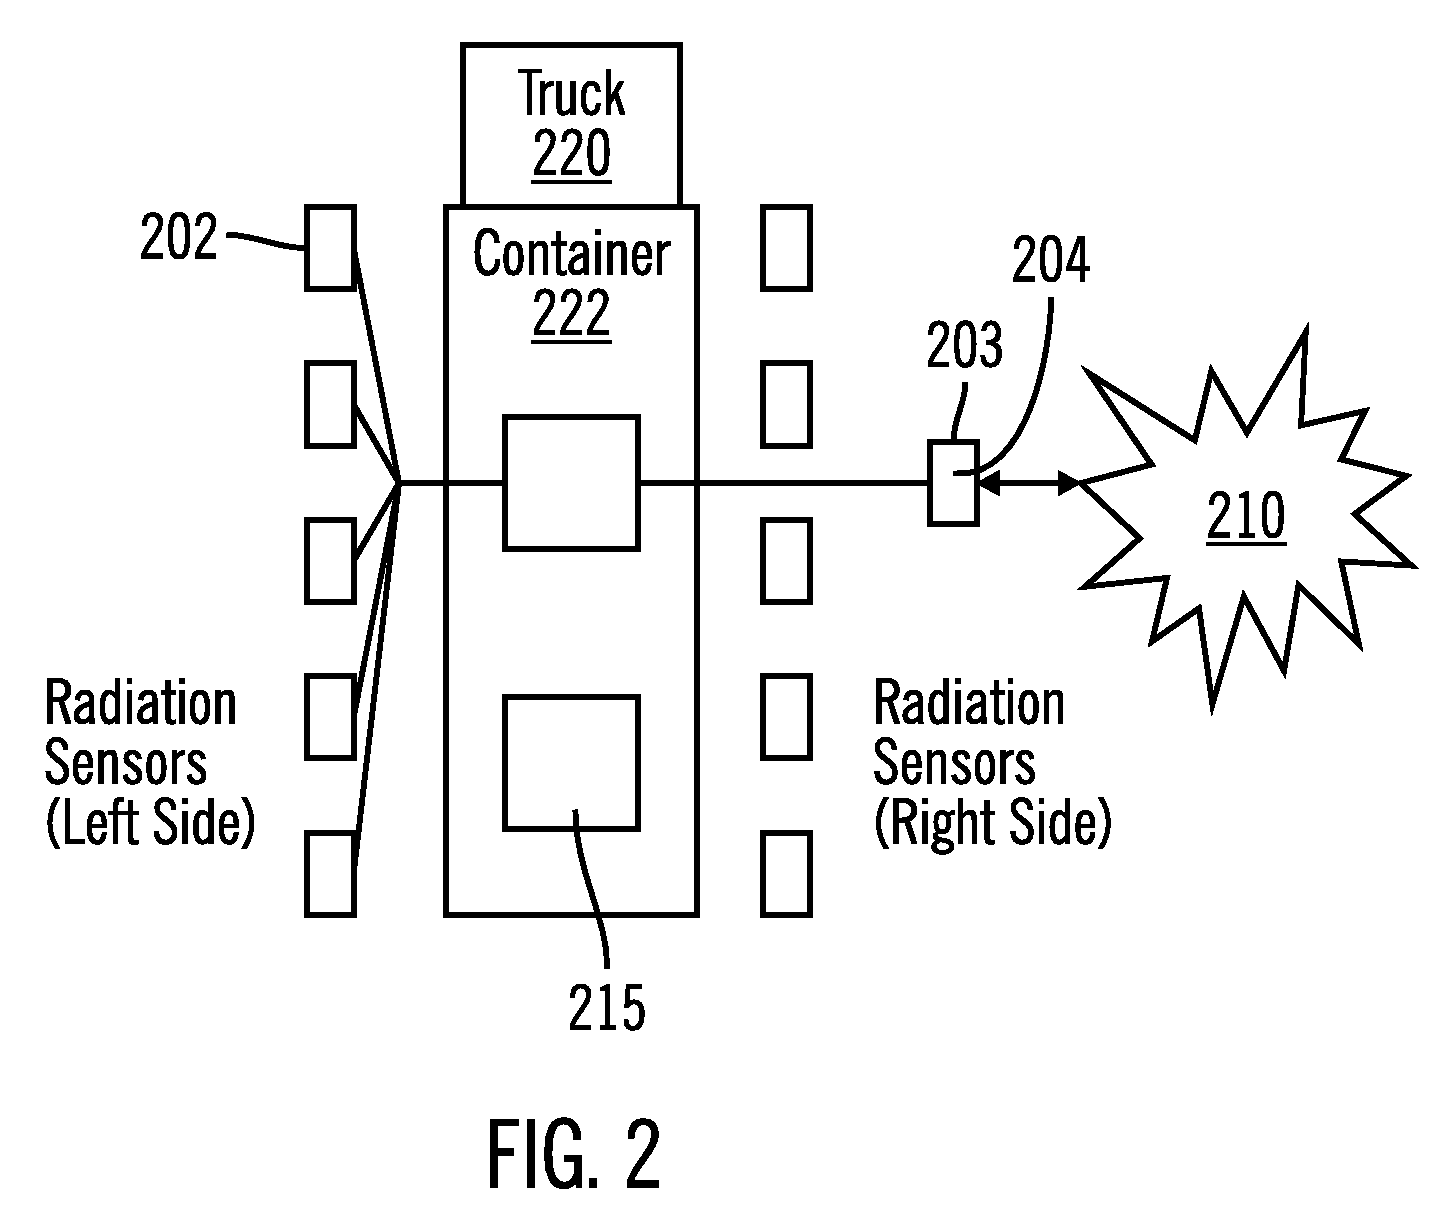 Multi-stage system for verification of container contents